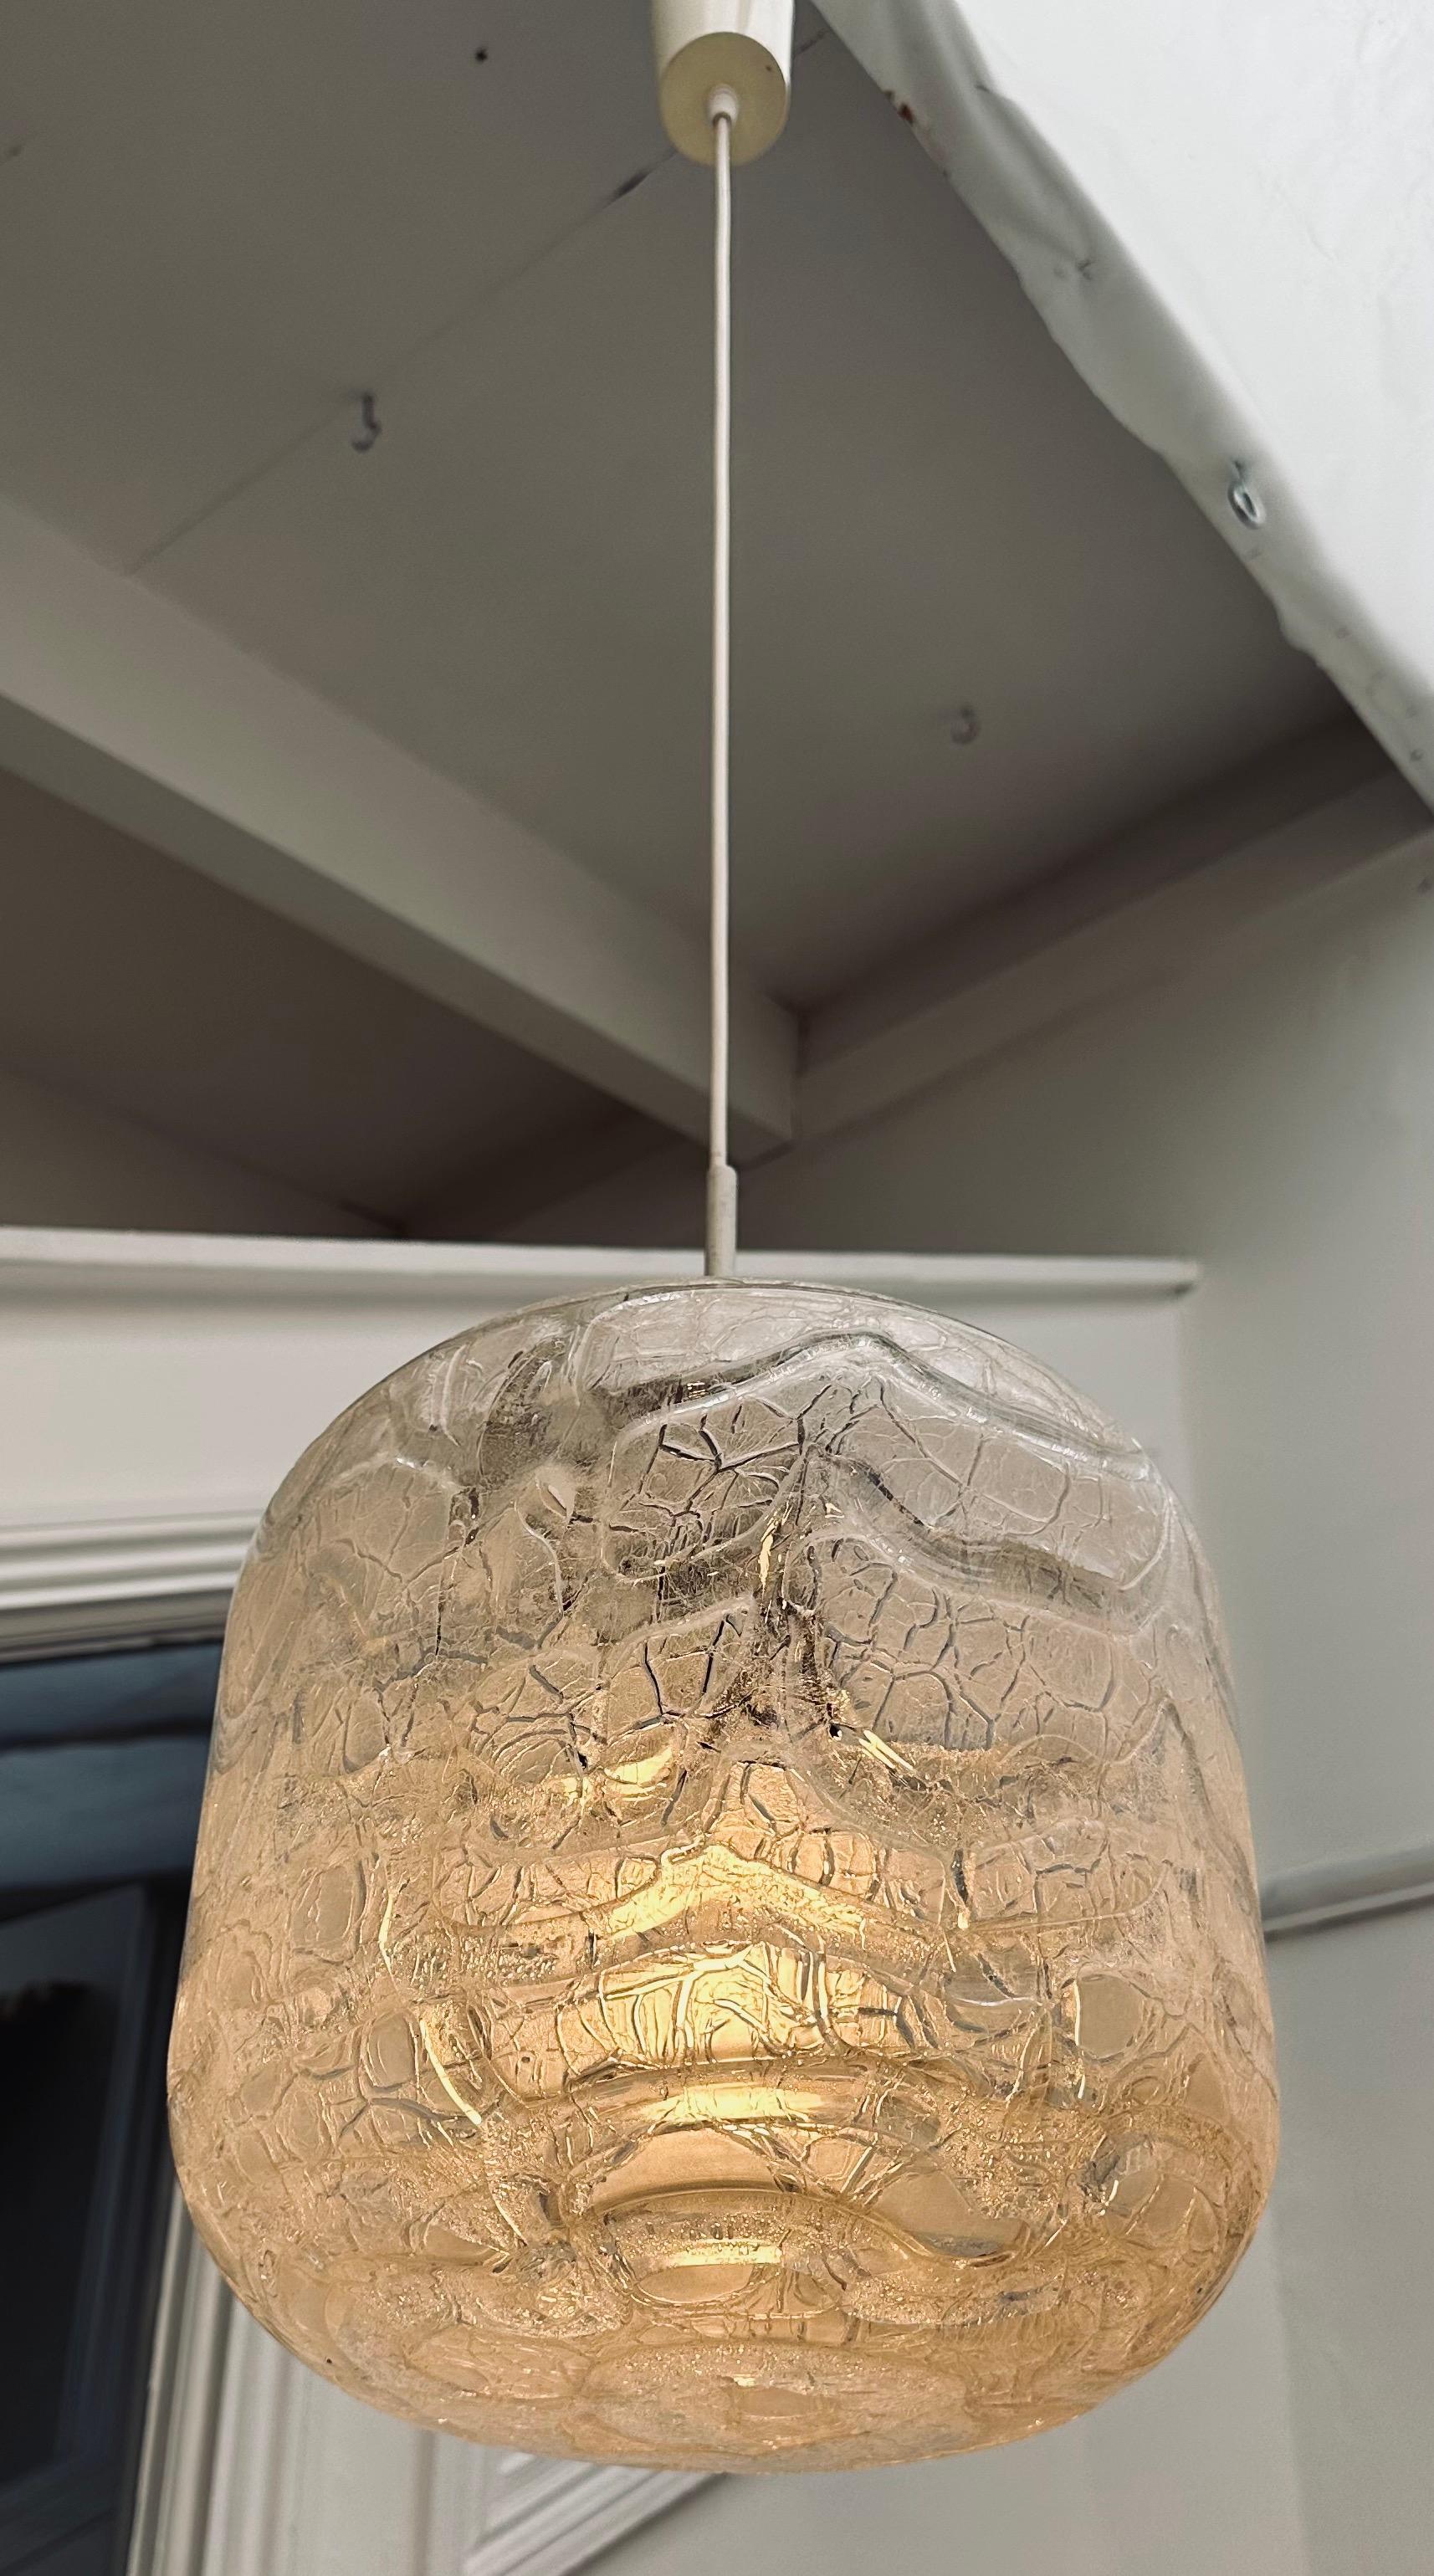 1970s Large crackled, textured, iced-glass, cylindrical, pendant hanging light manufactured by Doria Leuchten in Germany. The shade hangs from a white flex with a matching ceiling cup which hides the wires where they connect to the ceiling. A